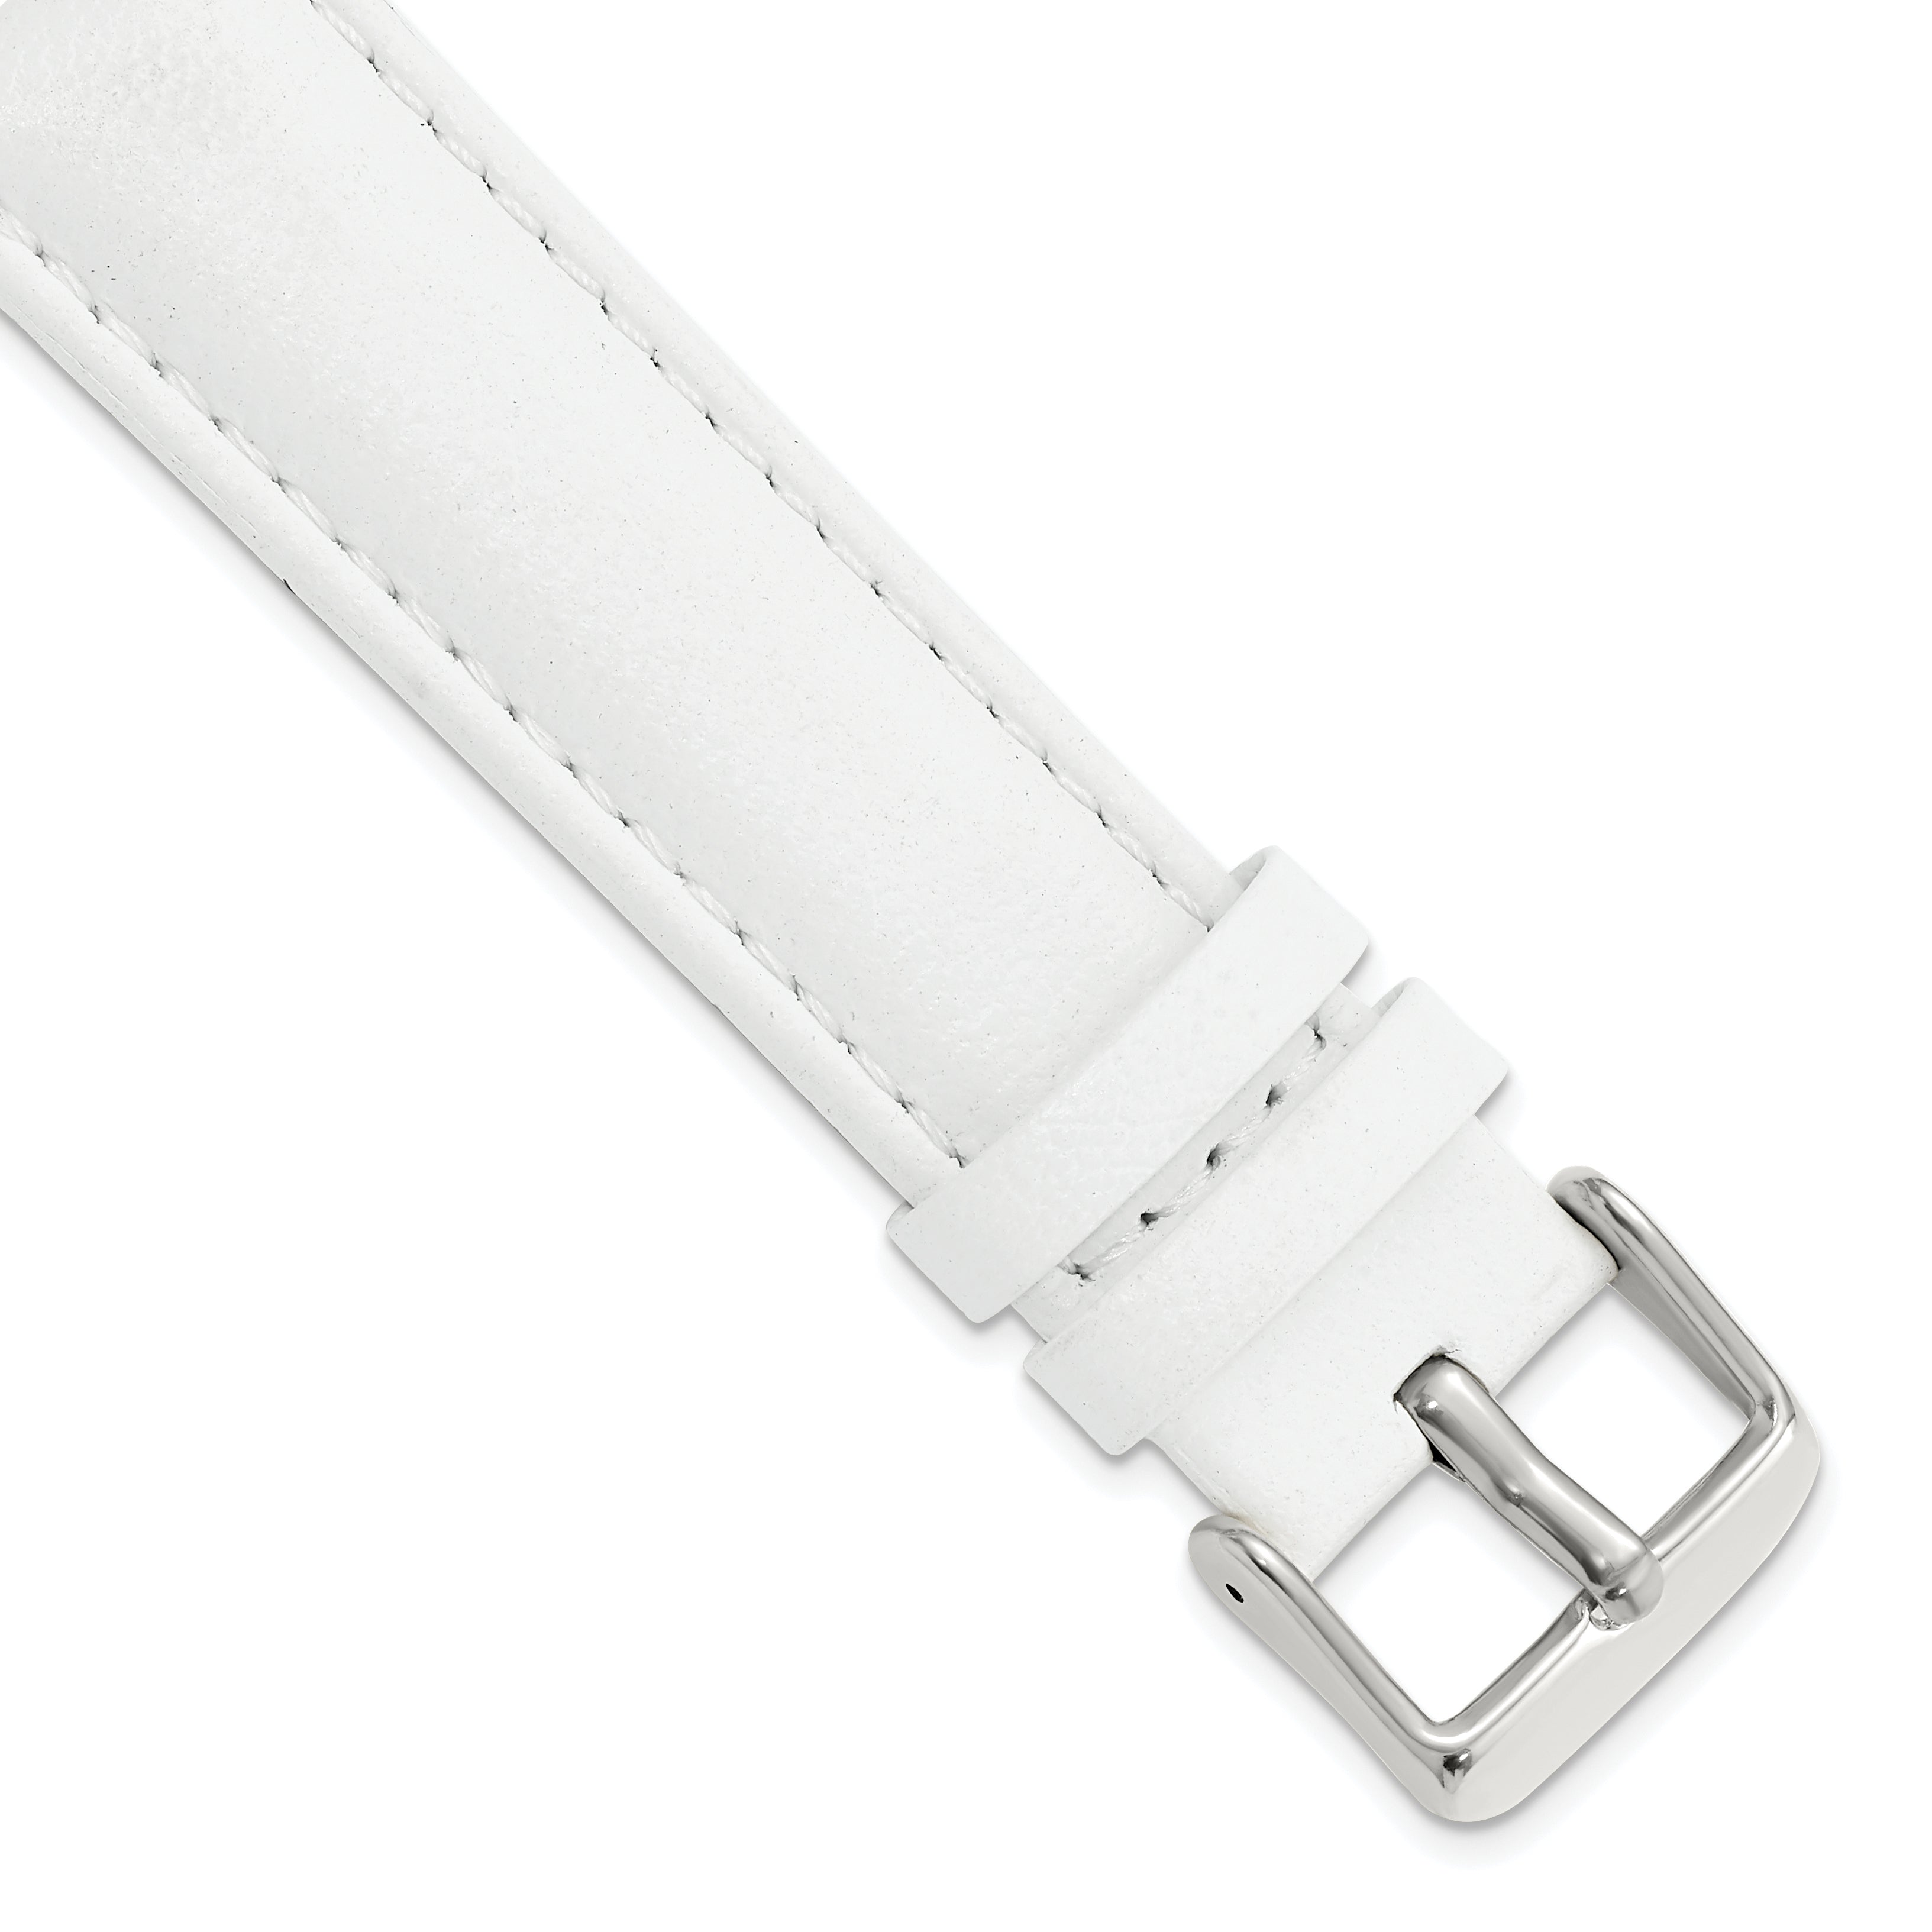 DeBeer 20mm White Glove Leather with Silver-tone Panerai Style Buckle 7.75 inch Watch Band